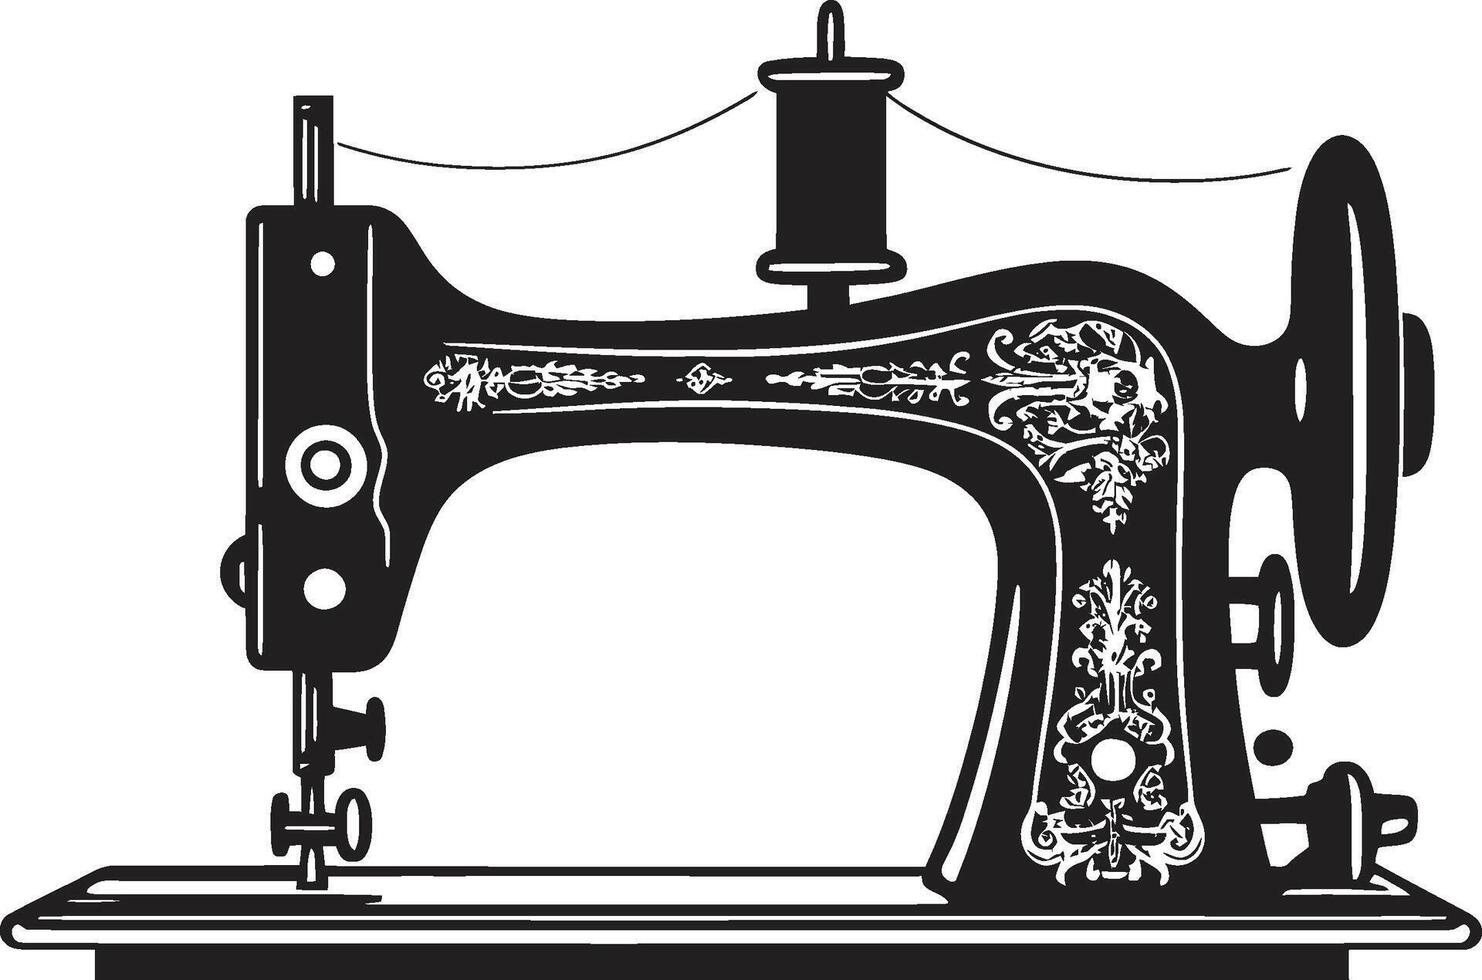 Stitch Symphony Black ic Sewing Machine in Monochrome Mastery Elegant for Black Sewing Machine vector